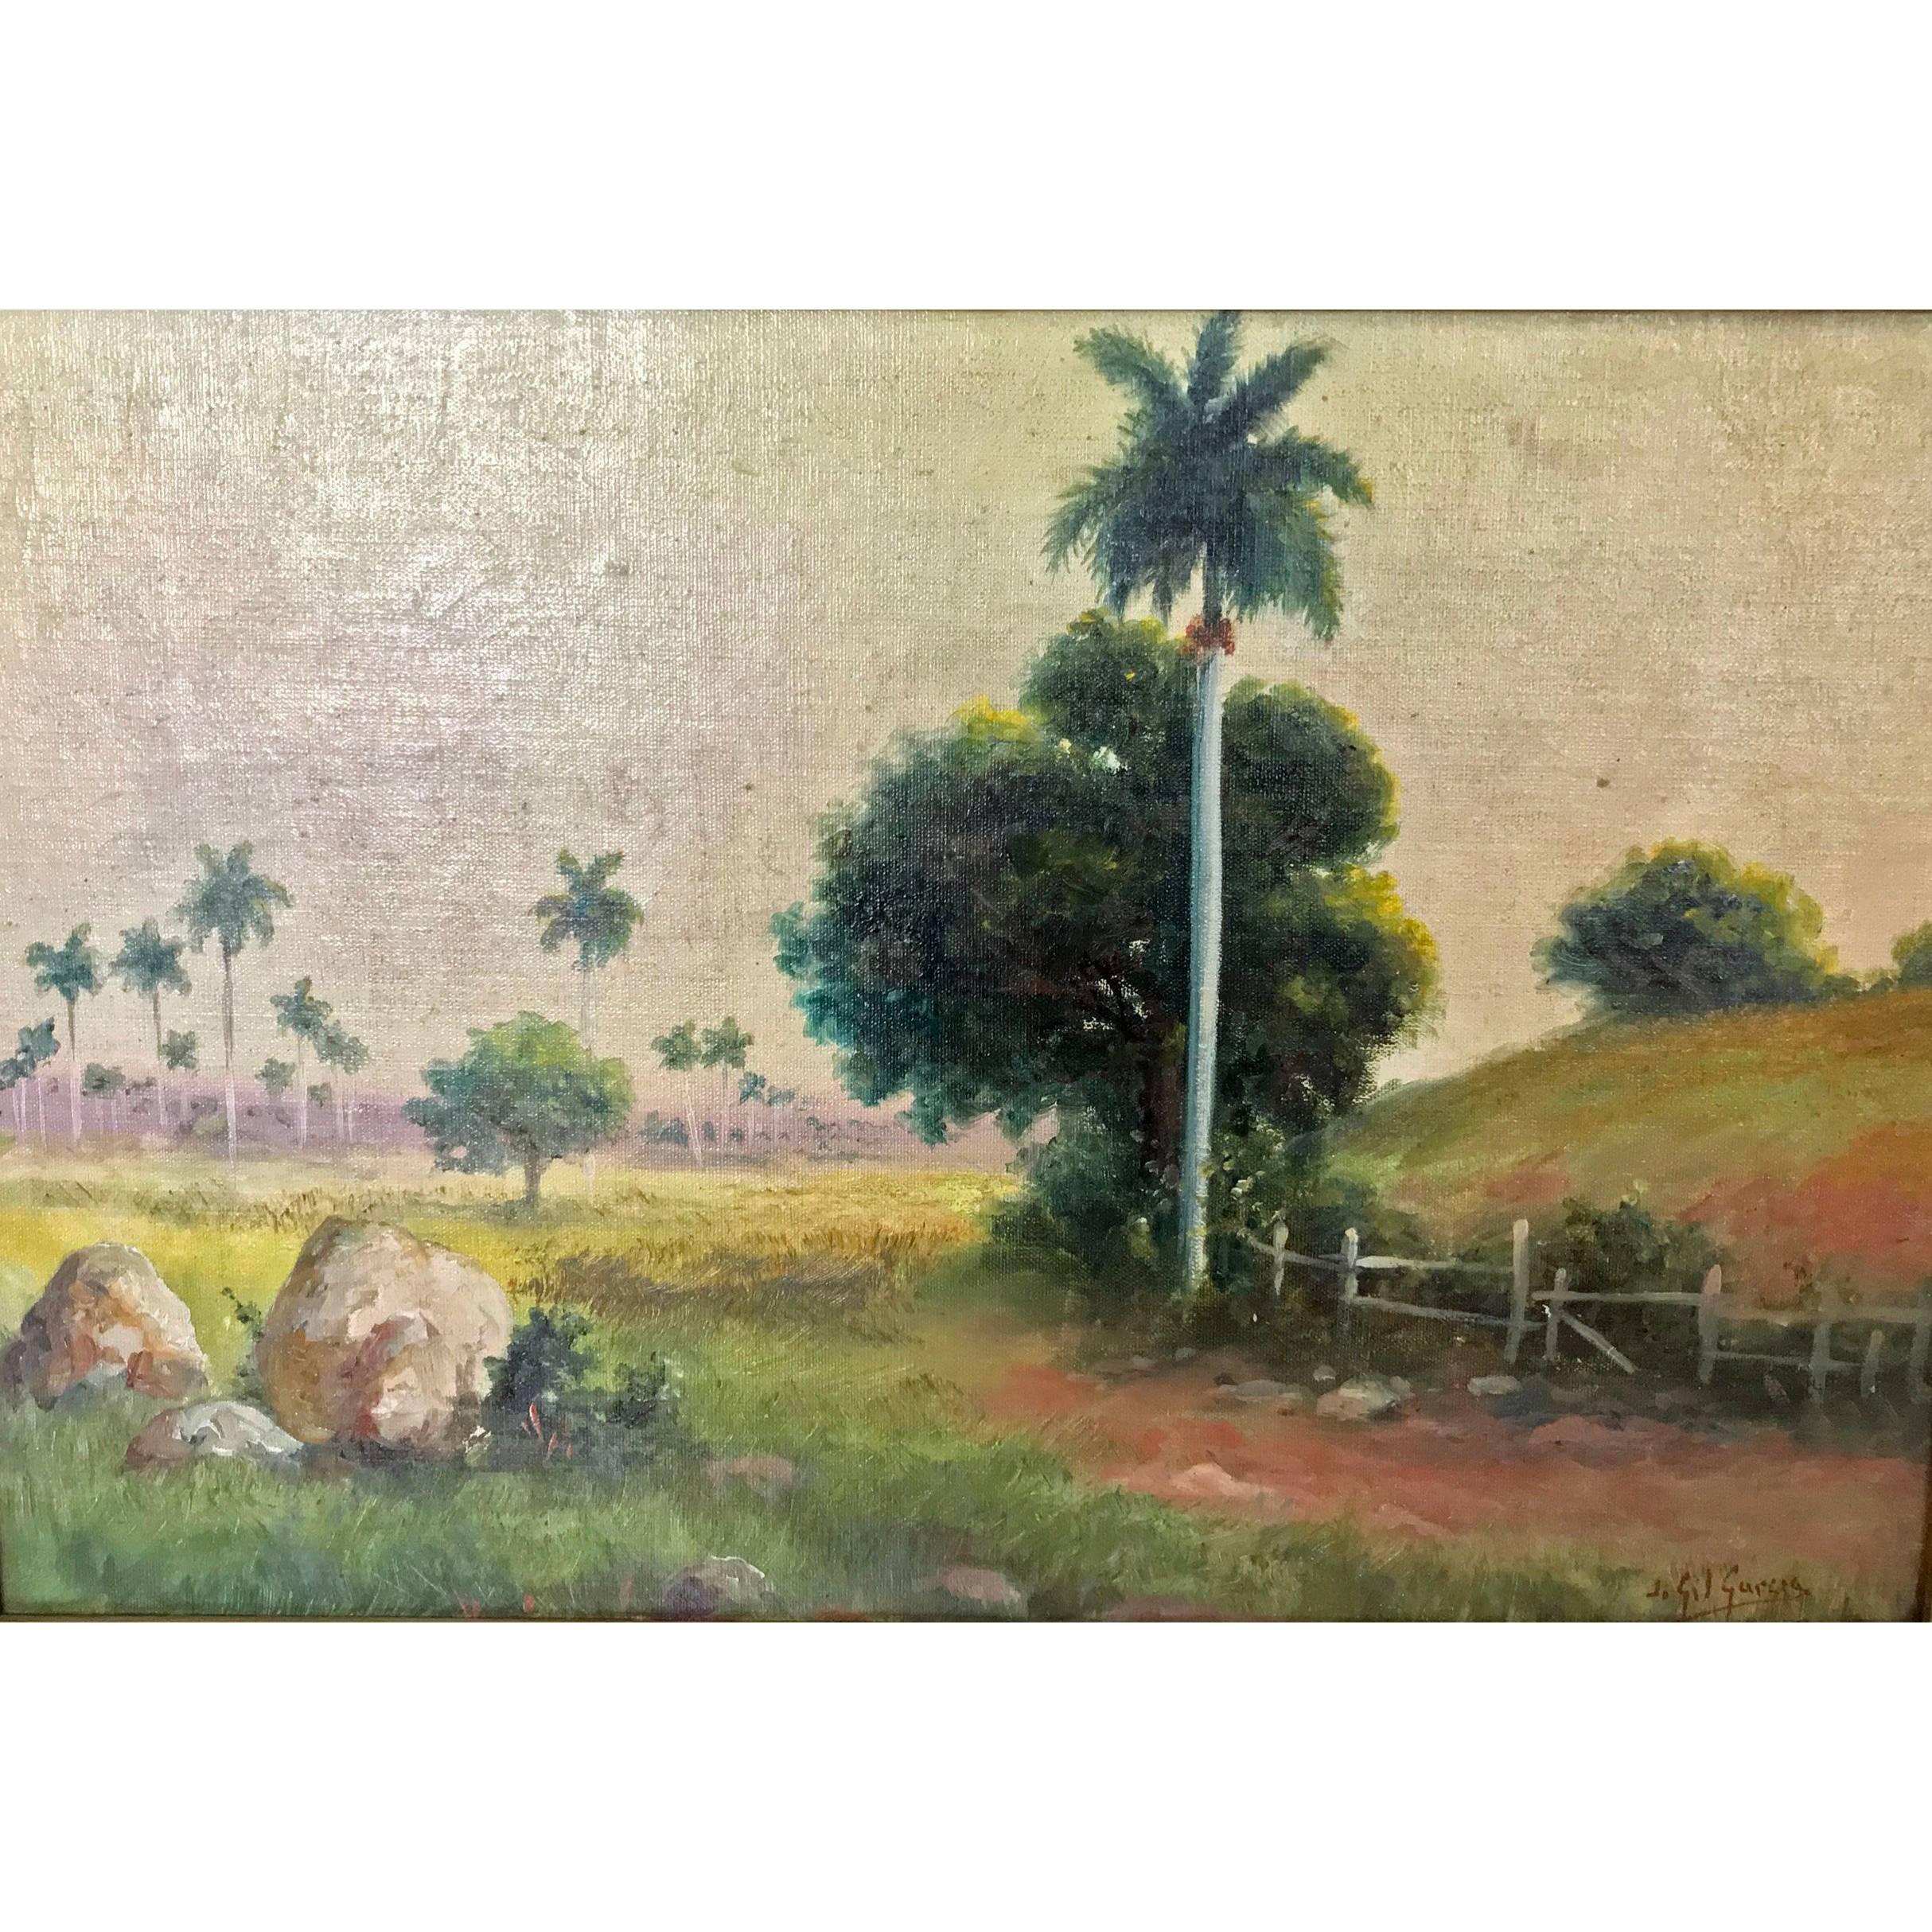 Juan Gil Garcia Landscape with Palms Oil on Canvas on Board